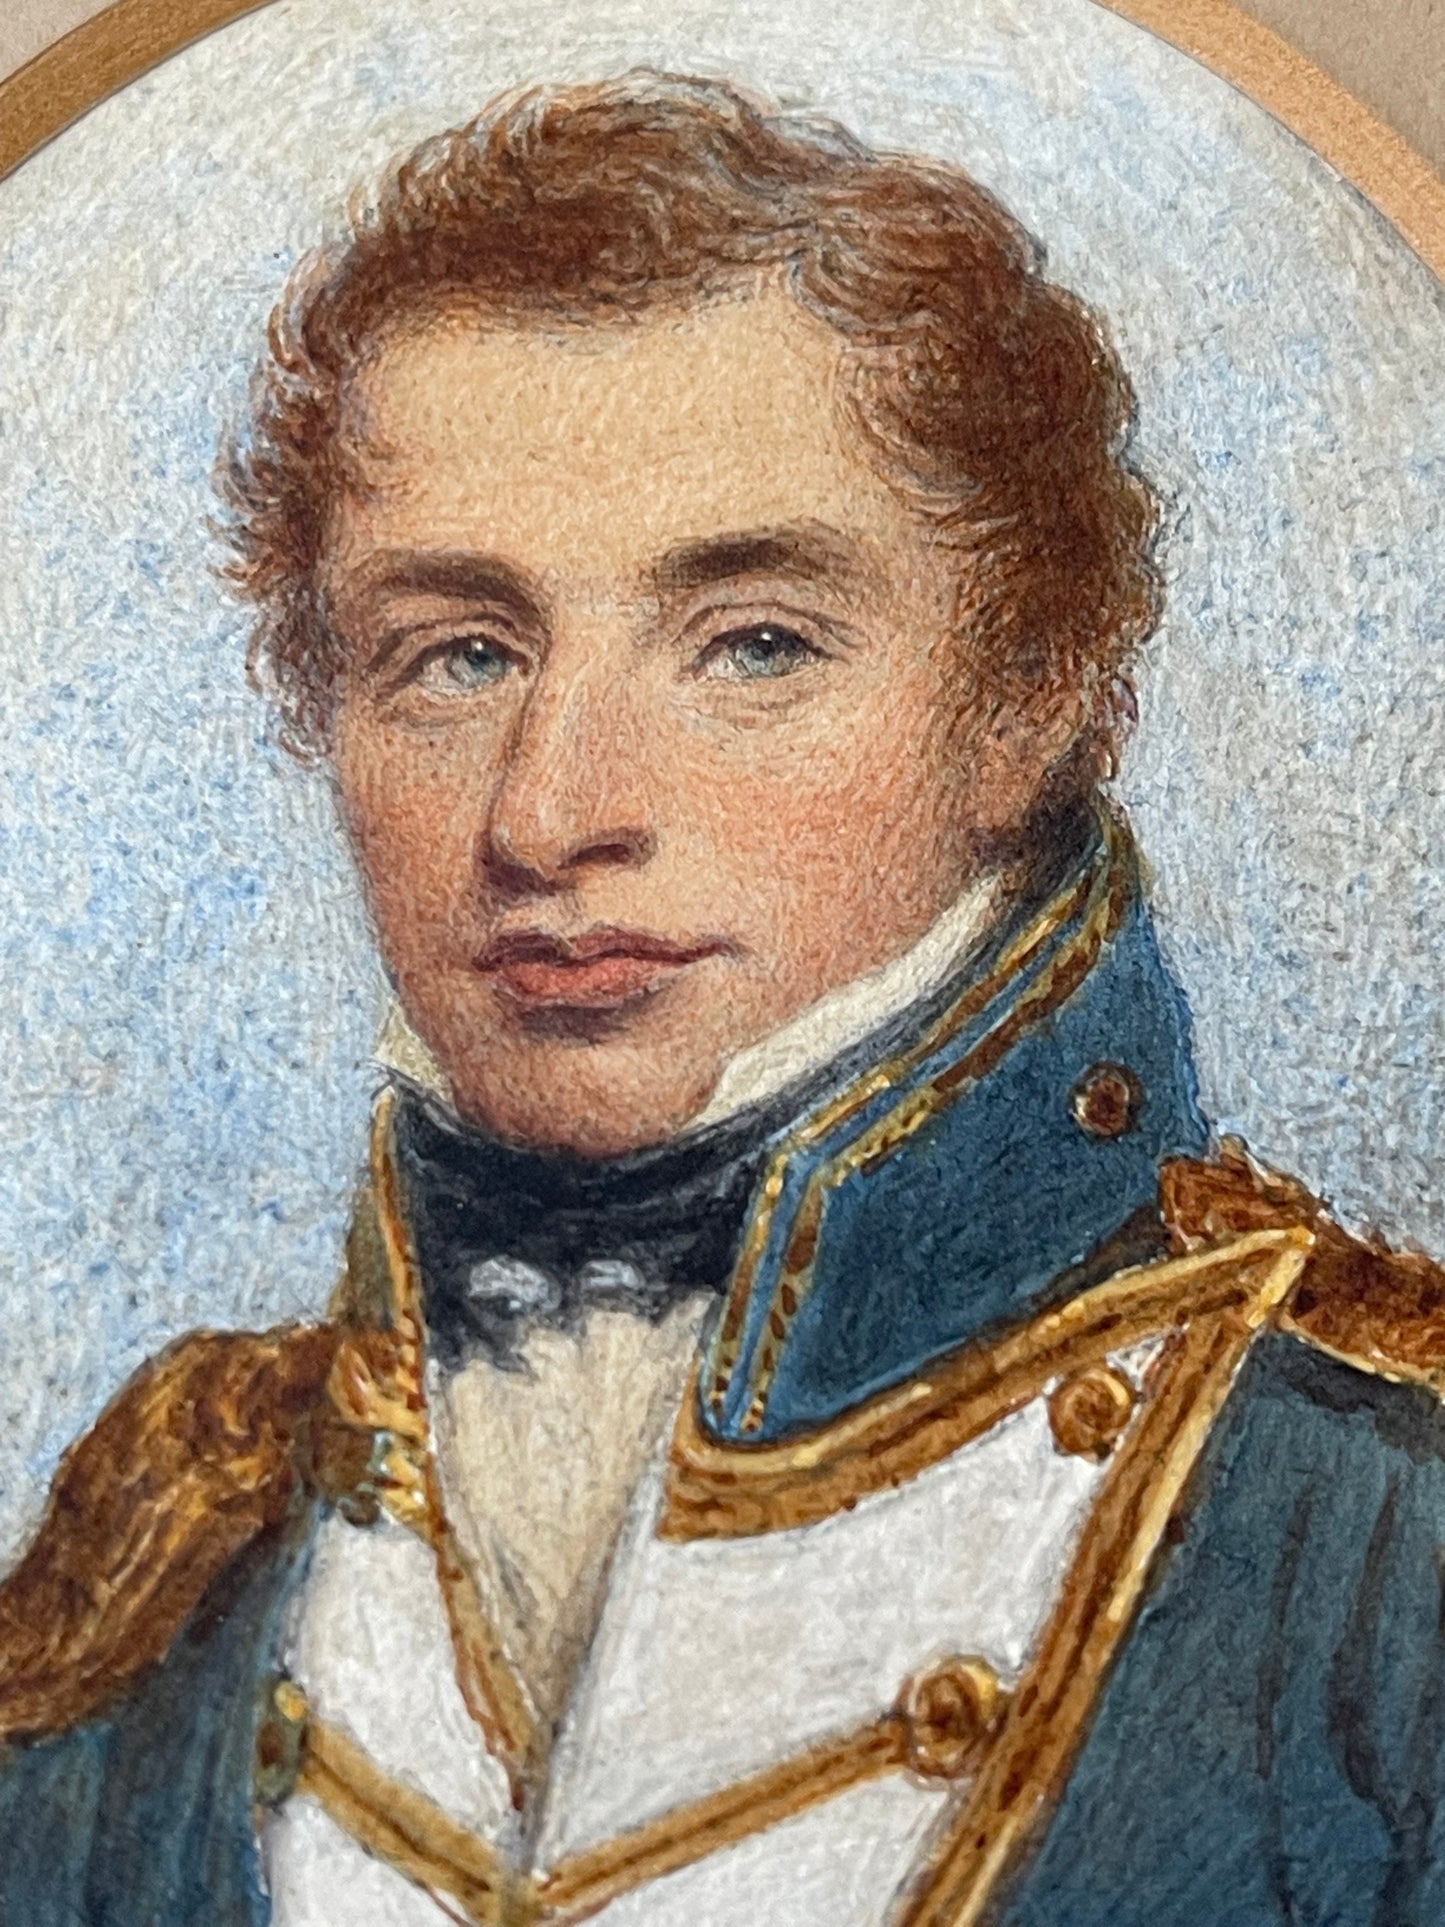 C1810 MINIATURE PORTRAIT ON CARD OF LT JAMES SCOTT 1790-1872 ROYAL NAVY FOUGHT IN AMERICA